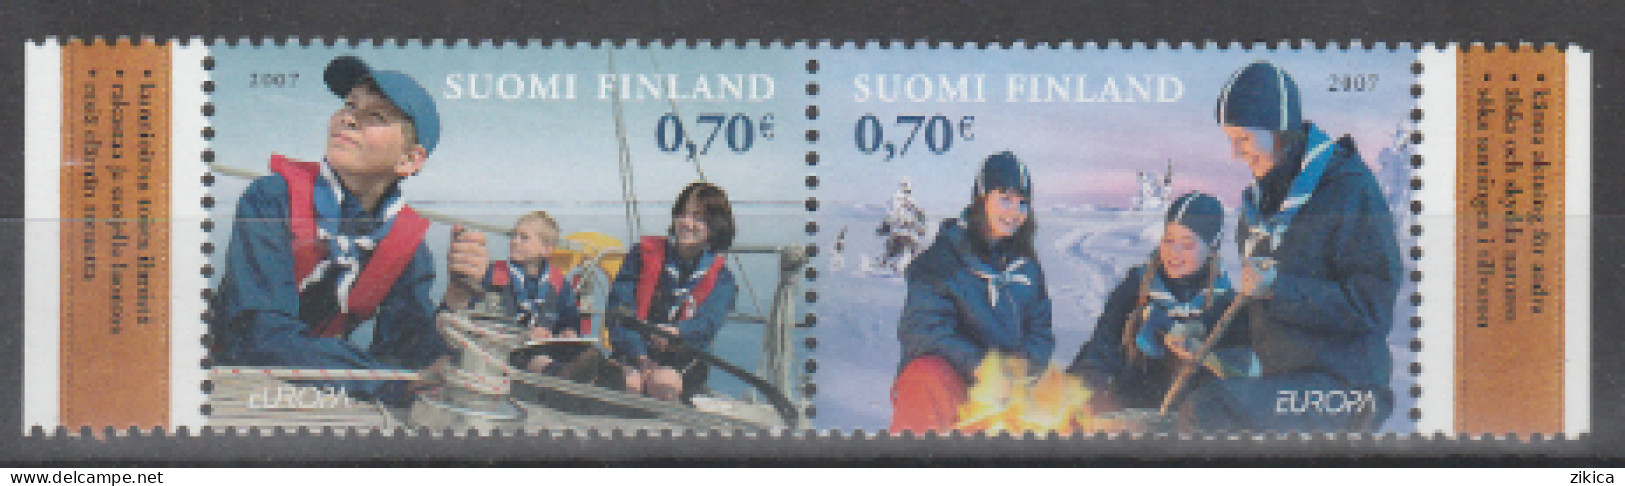 Finland - 2007 EUROPA Stamps - The 100th Ann. Of Scouting. MNH** - Unused Stamps